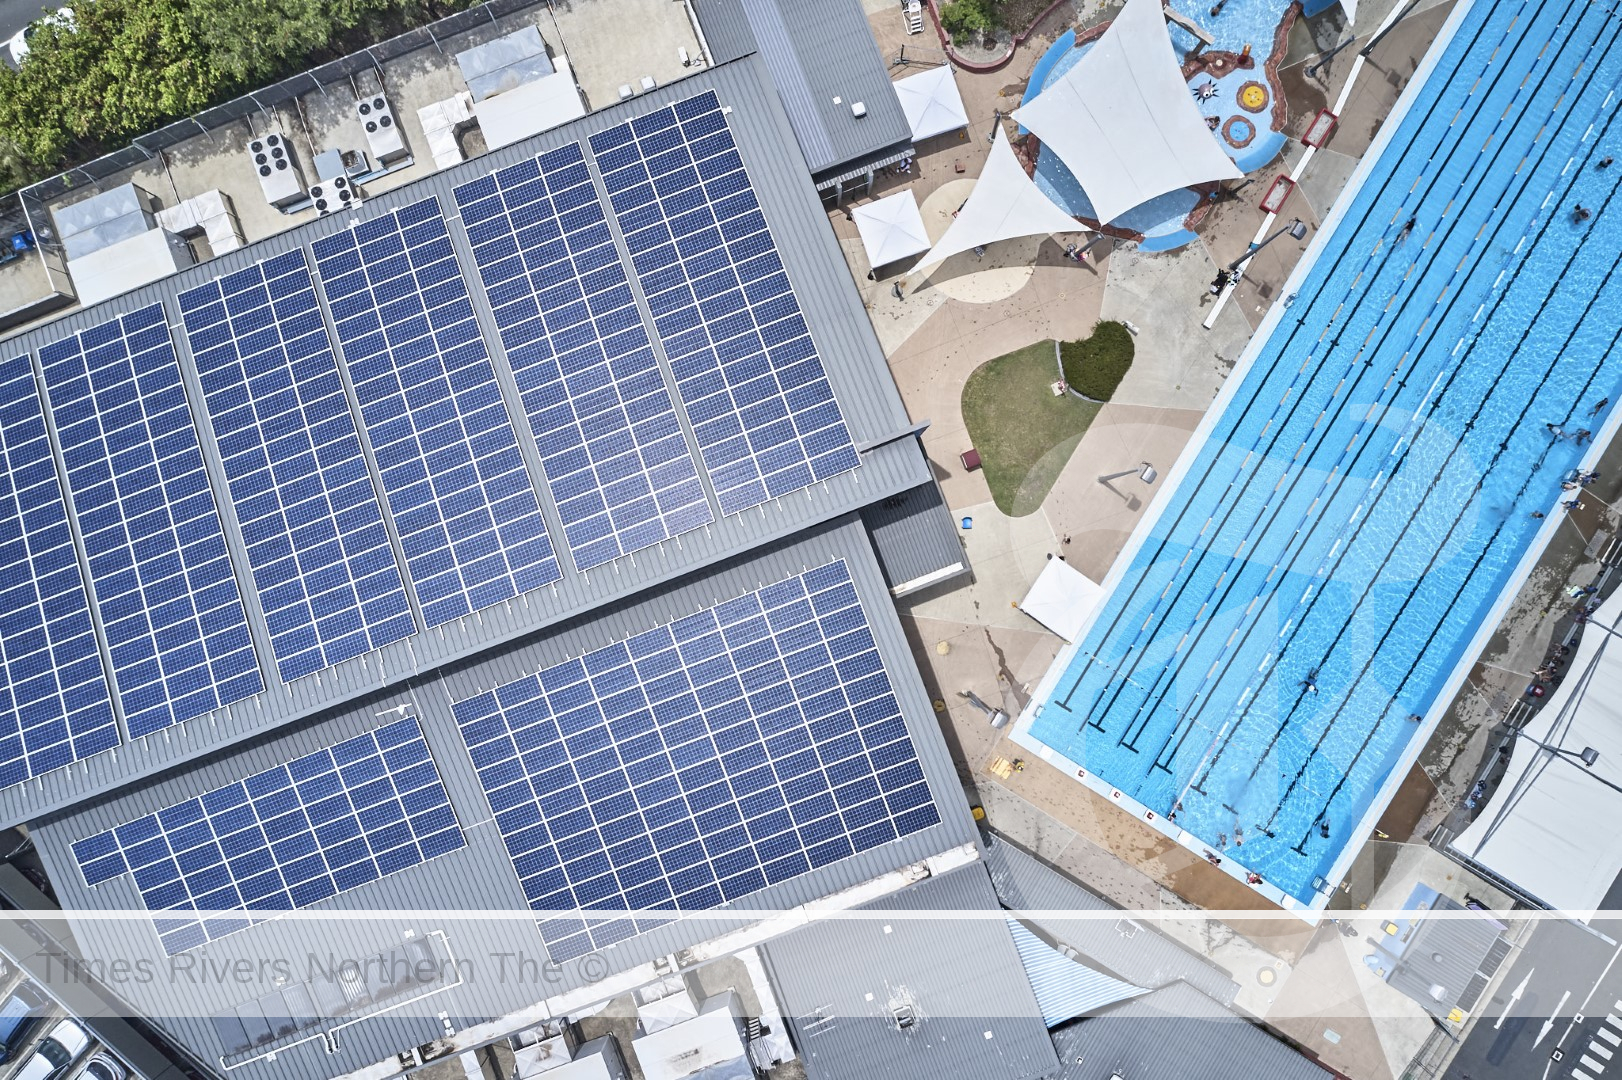 Tweed’s councillors voted unanimously back in early April to move to phase to of  the group’s Renewable Energy Action Plan – which includes 10 solar projects worth more than $1million.